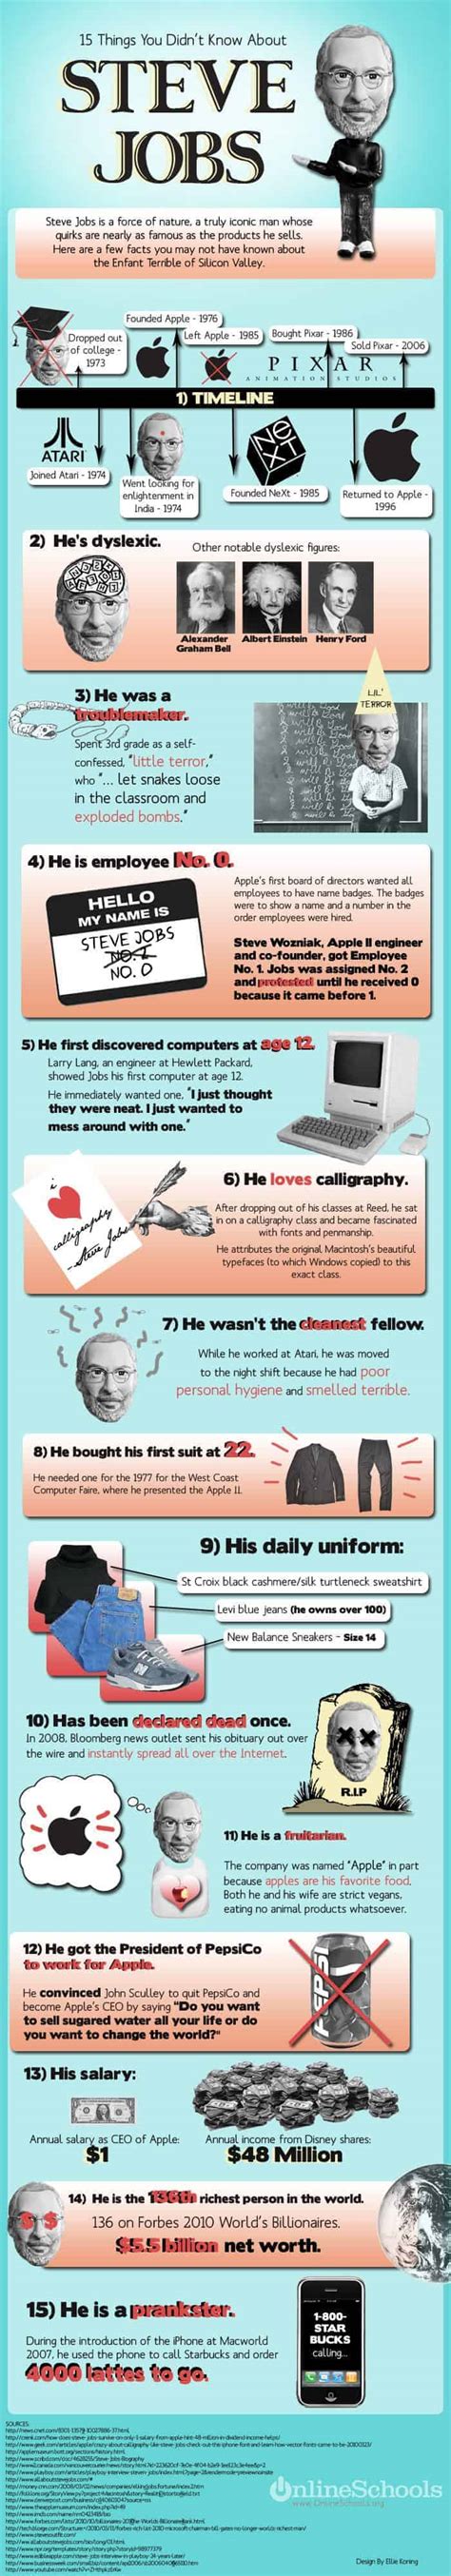 15 Steve Jobs Facts Daily Infographic